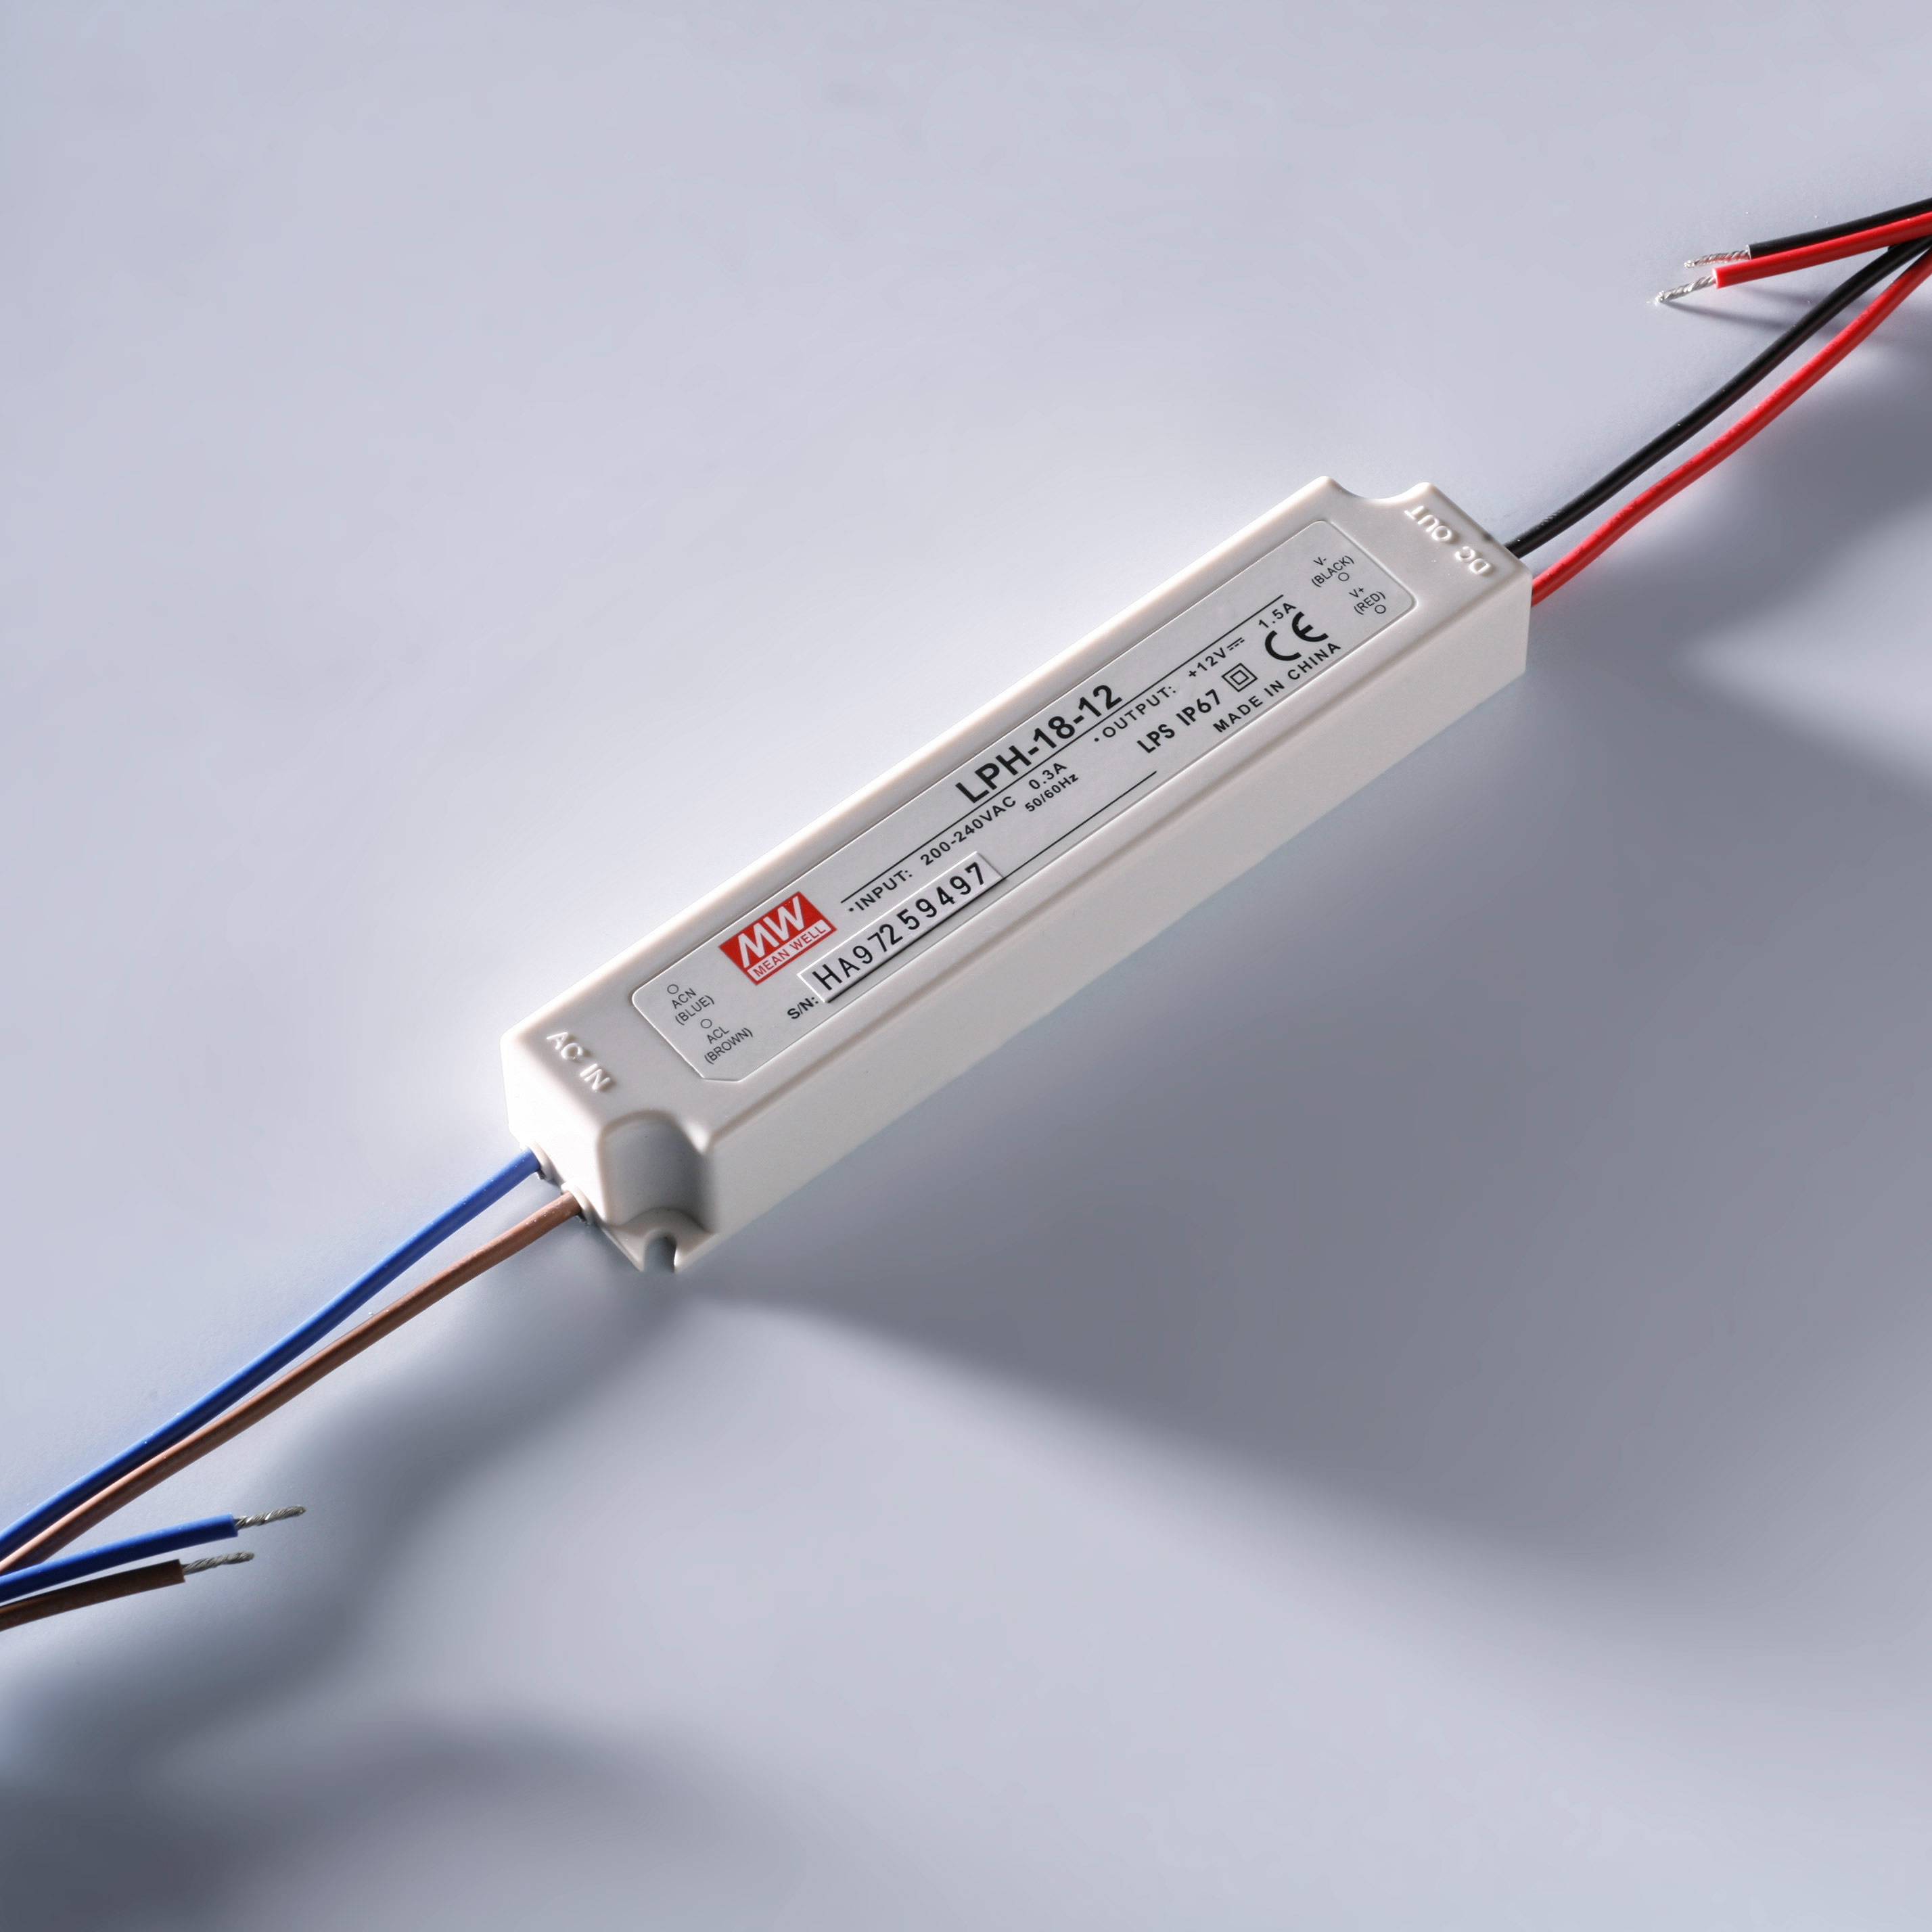 Driver LED a corrente costante MEAN WELL LPC-20-700 IP67 700mA 9 > 30V